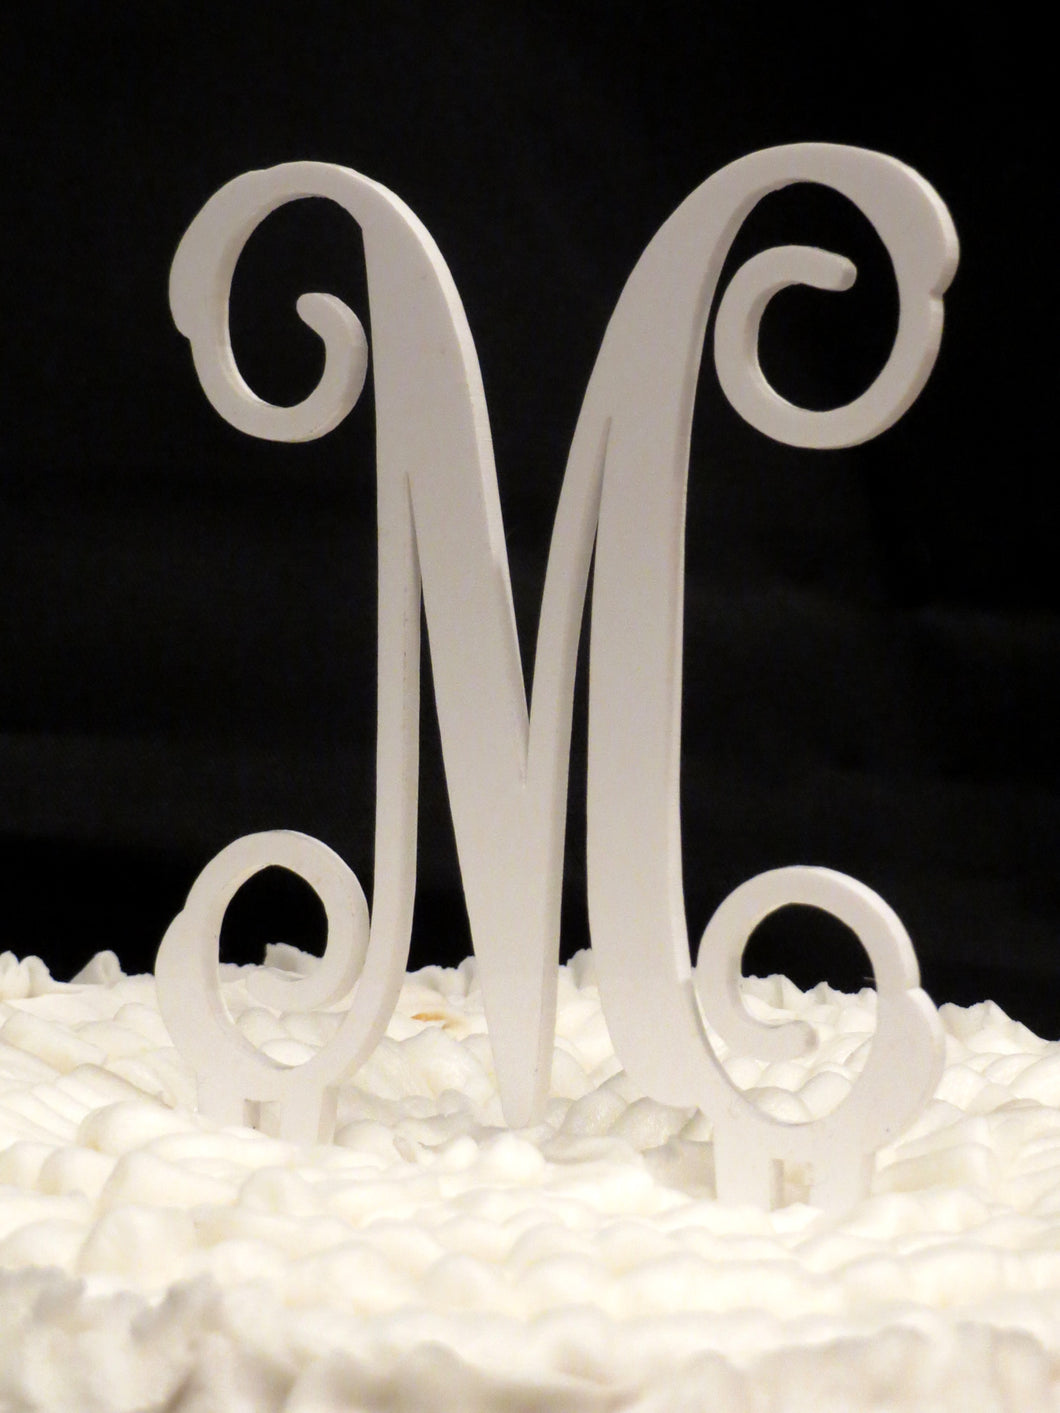 How to make a Letter Cake! - YouTube